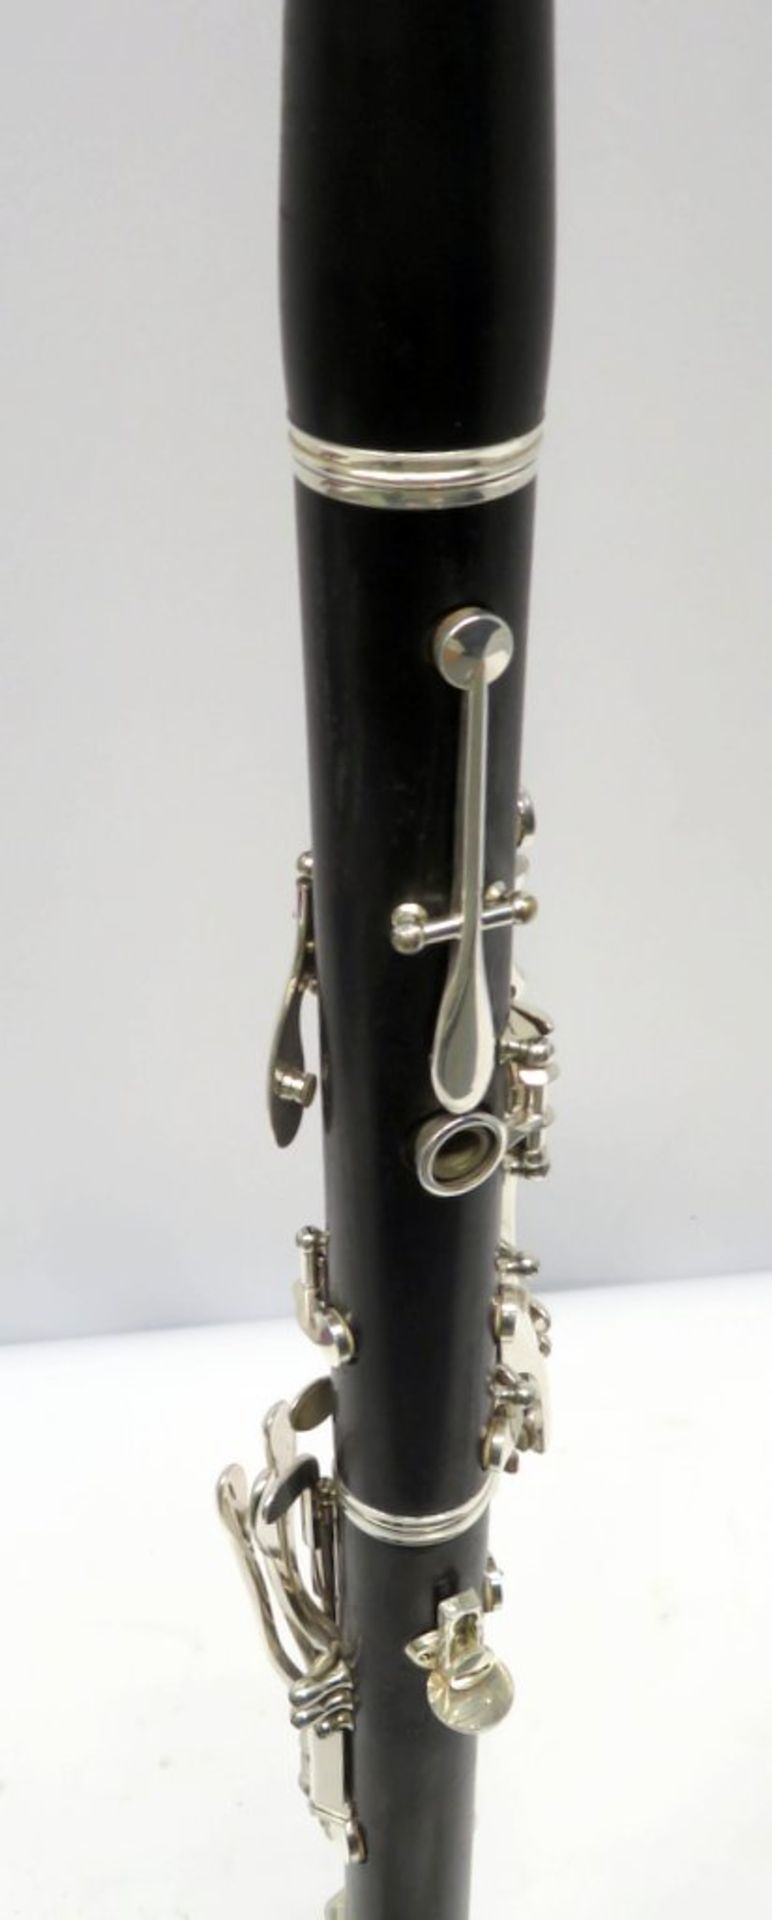 Buffet Crampon Prestige R13 Clarinet Complete With Case. - Image 16 of 18